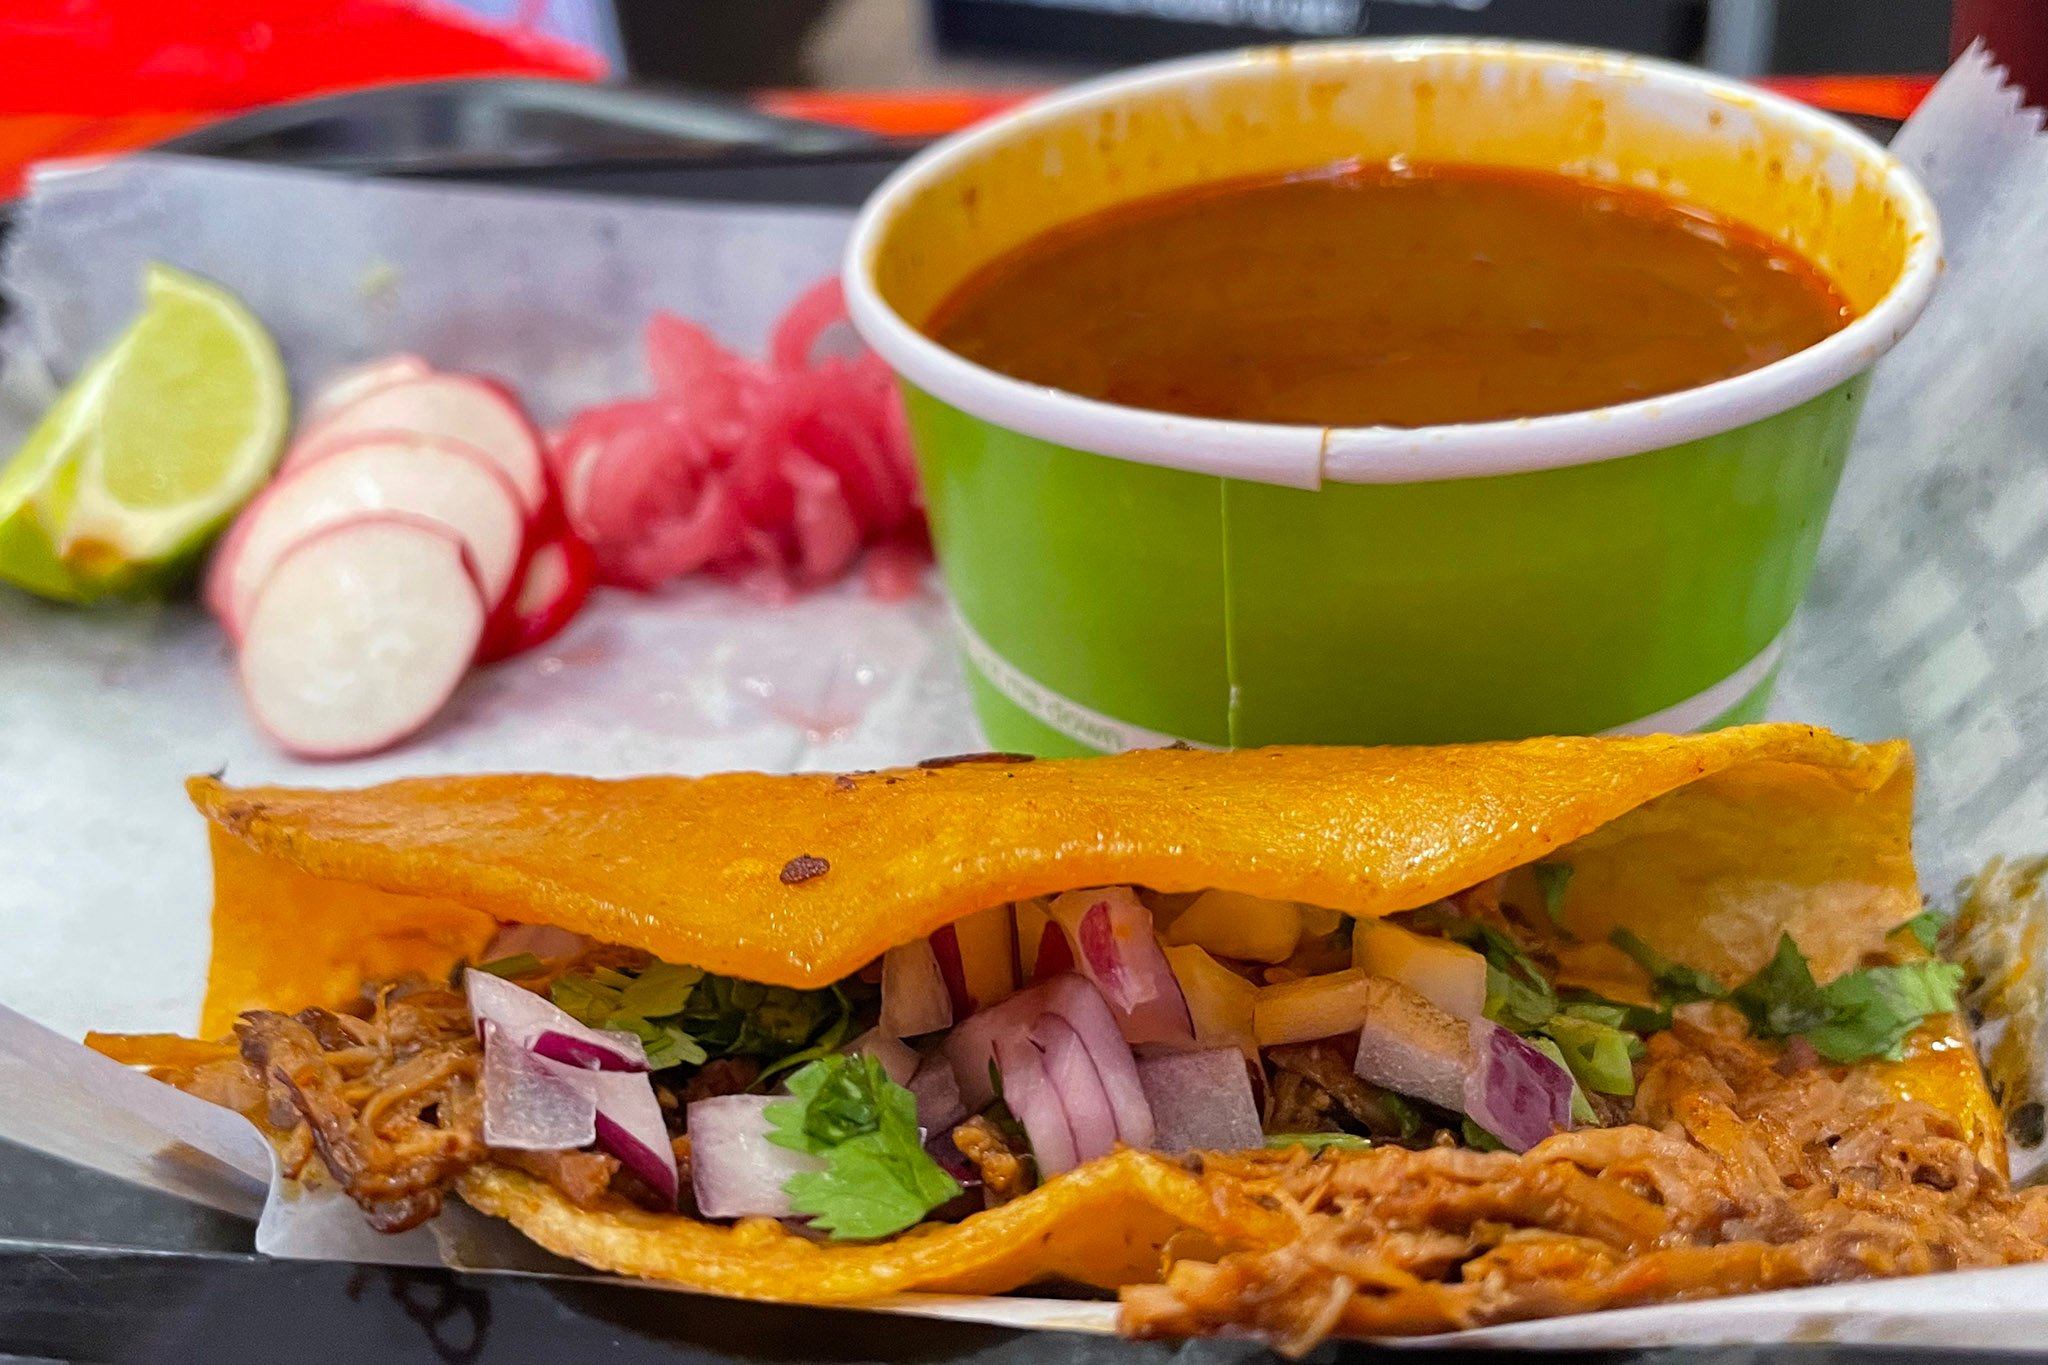 Mike's Red Tacos expounds upon birria in Clairemont | San Diego Reader